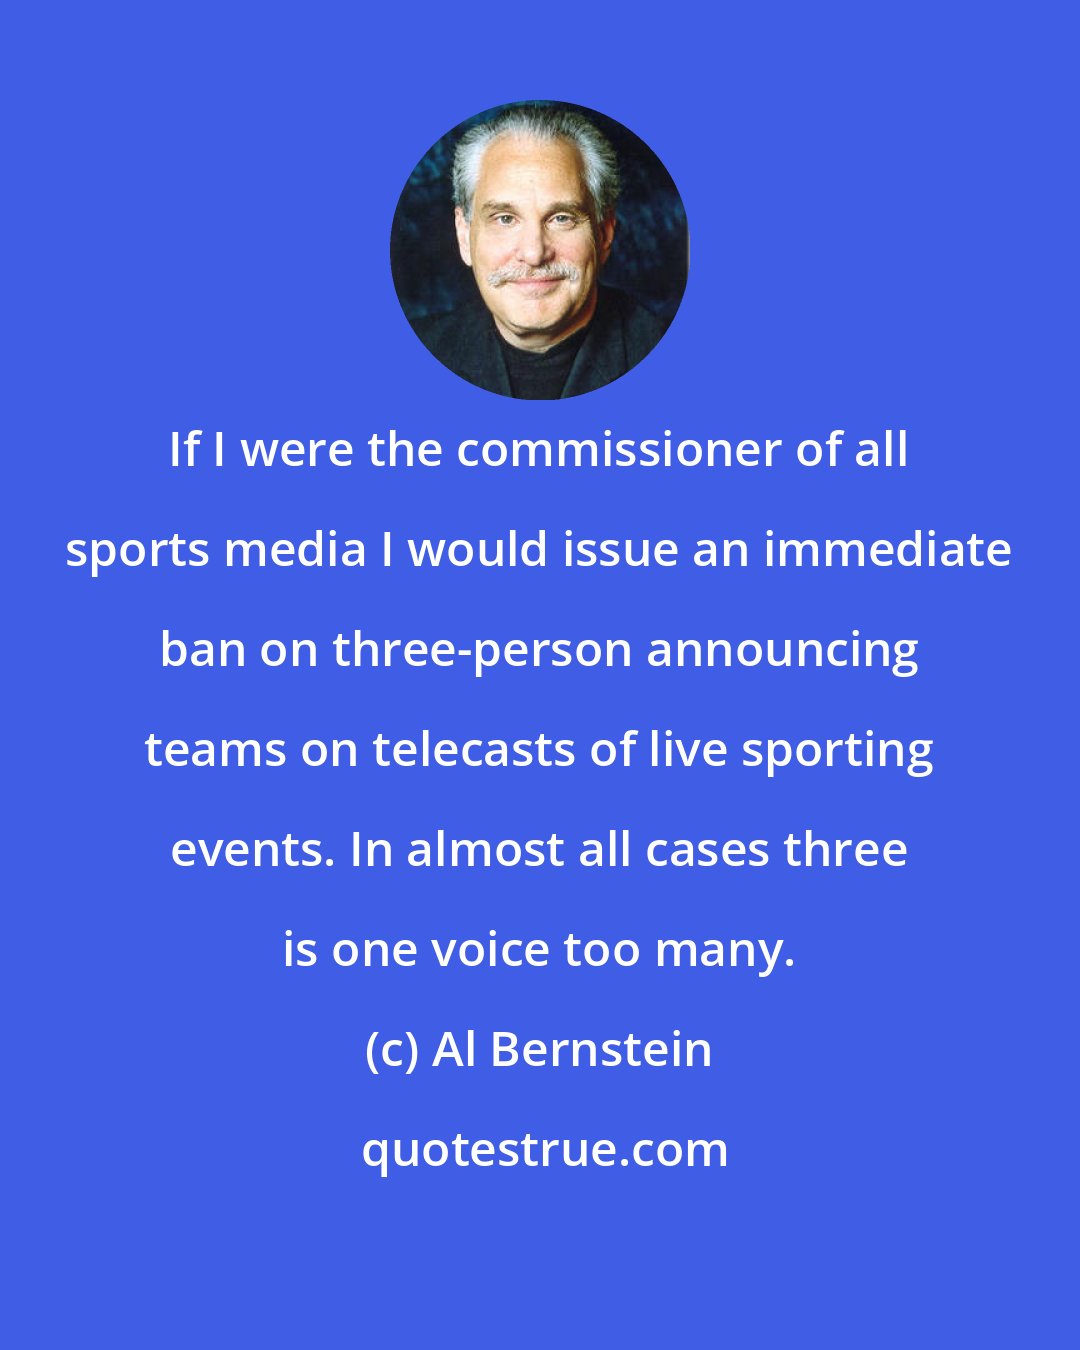 Al Bernstein: If I were the commissioner of all sports media I would issue an immediate ban on three-person announcing teams on telecasts of live sporting events. In almost all cases three is one voice too many.